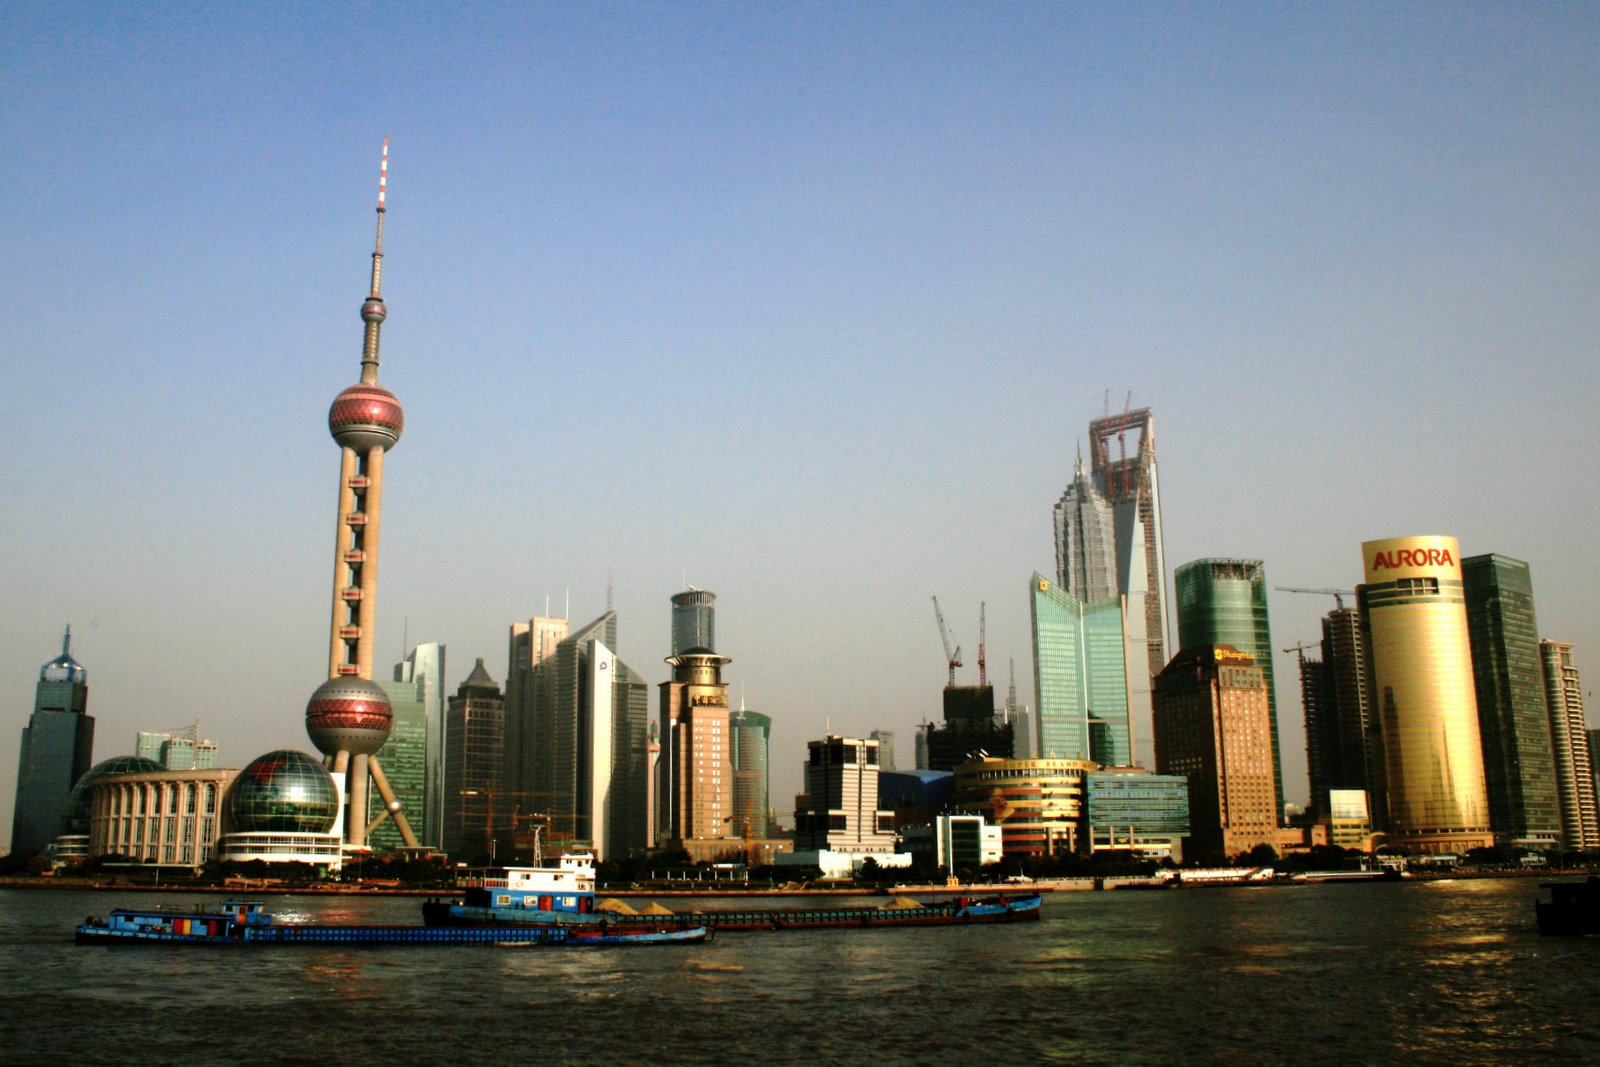 Shanghai, Pudong area